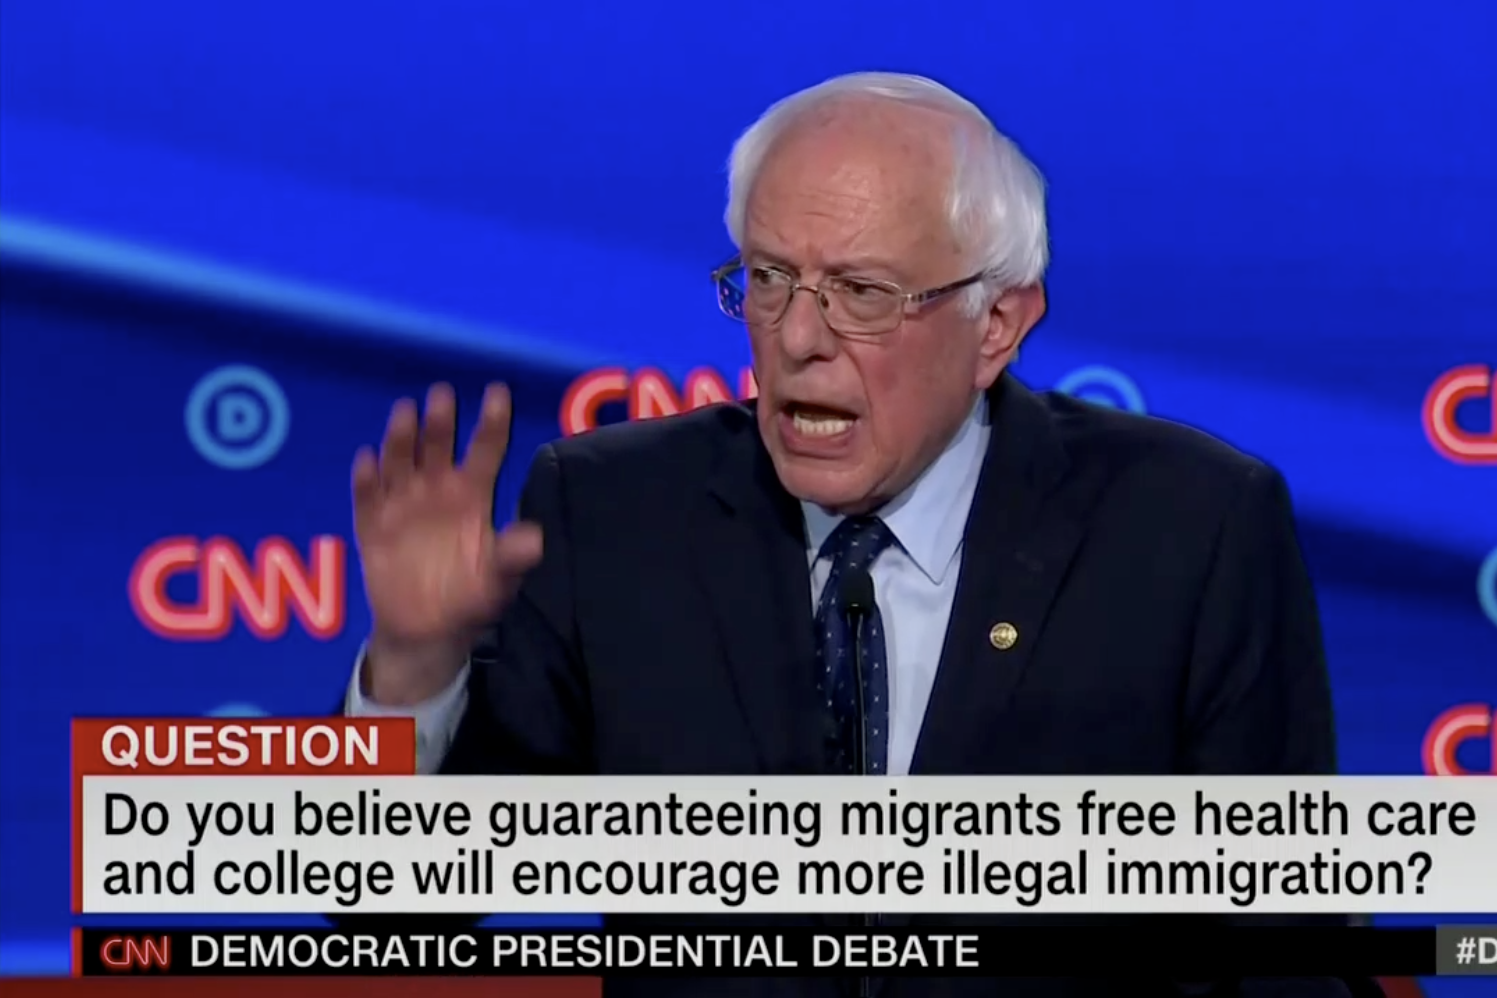 In this screengrab from CNN, Bernie Sanders debates. The banner reads: "Do you believe guaranteeing more migrants free health care and college will encourage more illegal immigration?"